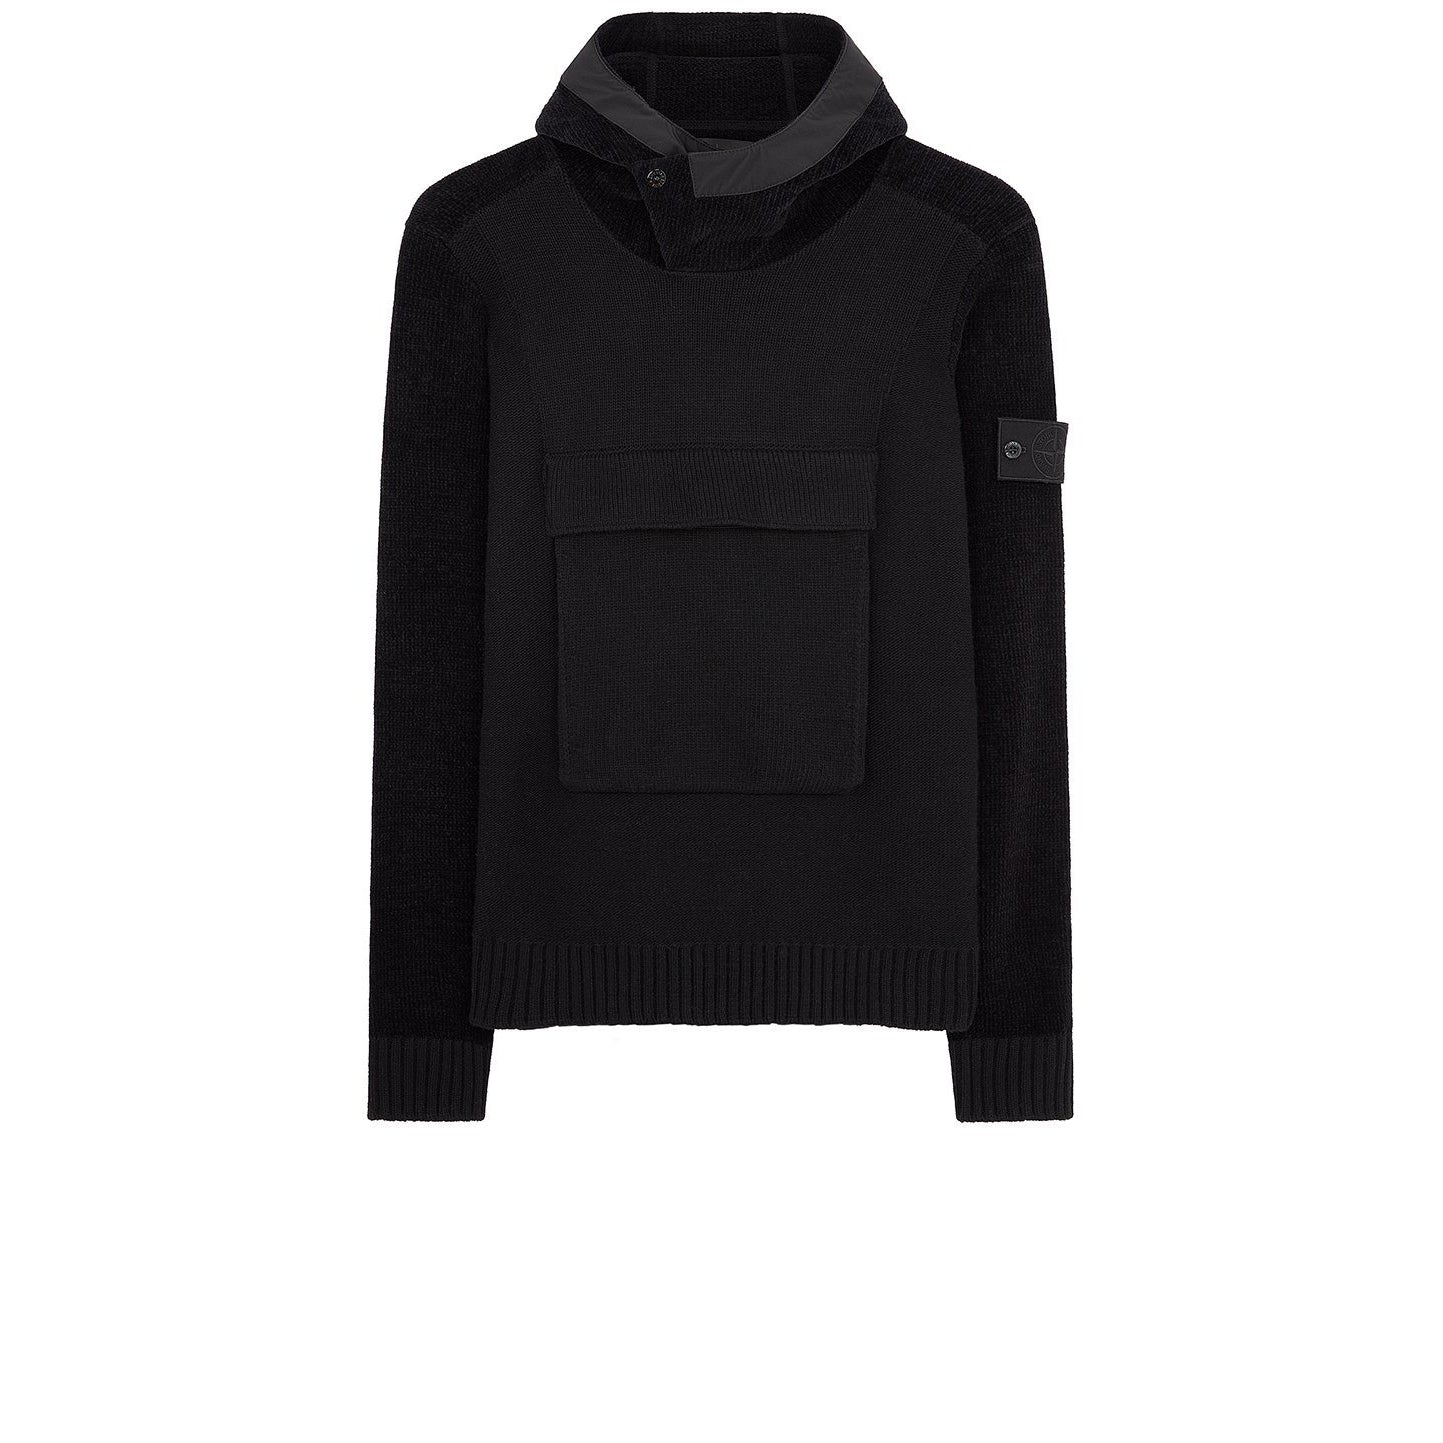 Stone Island Ghost Knit Hoodie Black - Centrall Online